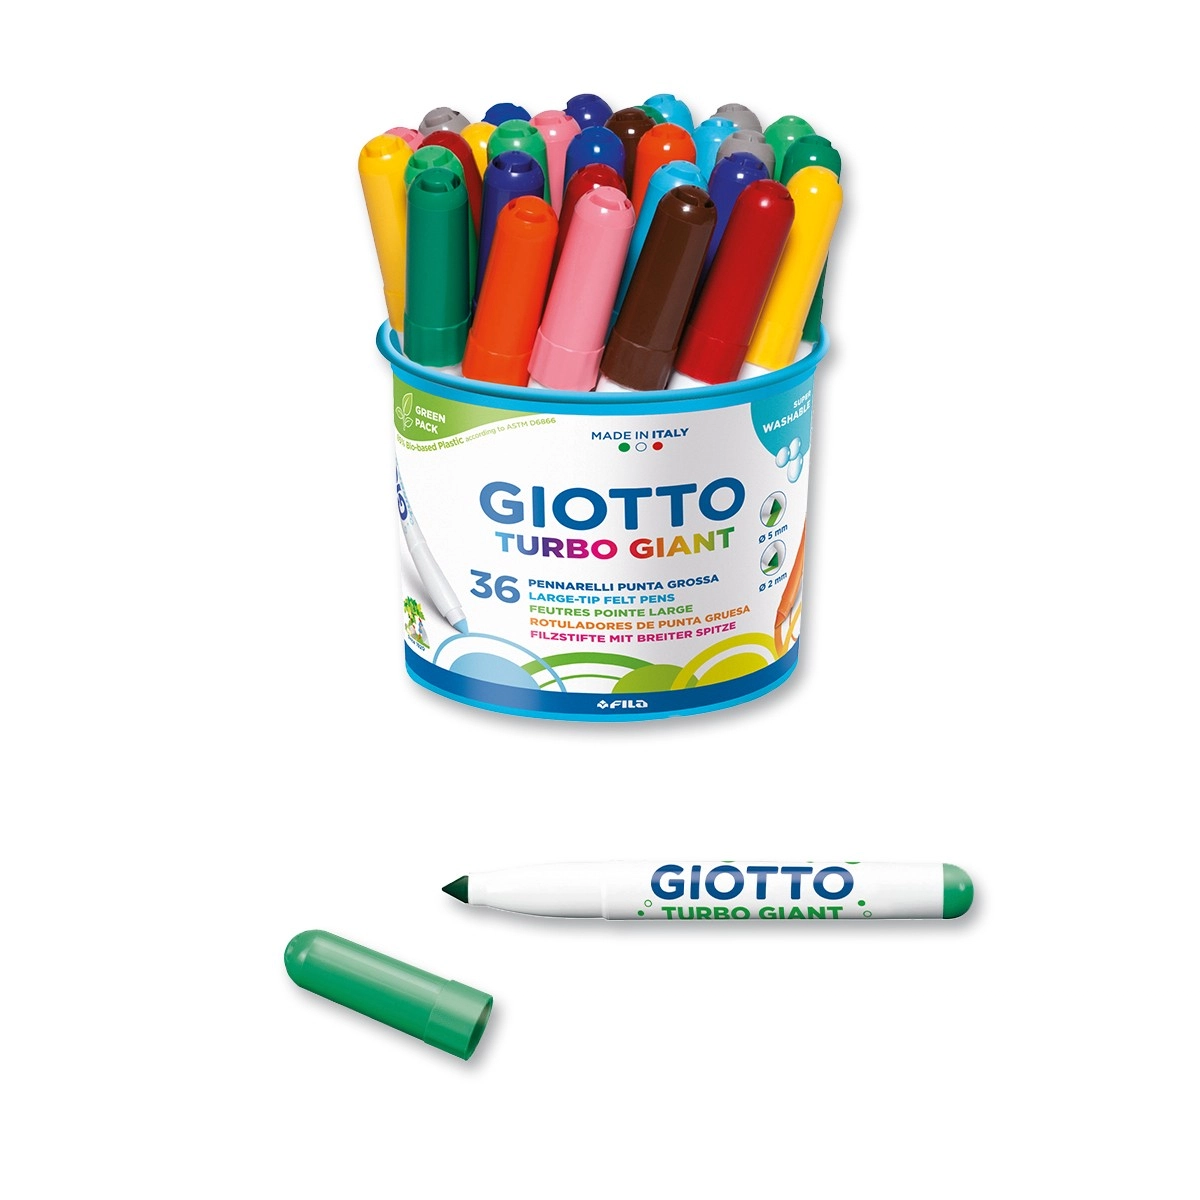 Giotto Be-Be Large Unbreakable Crayons - Pack of 10 (GBLP10